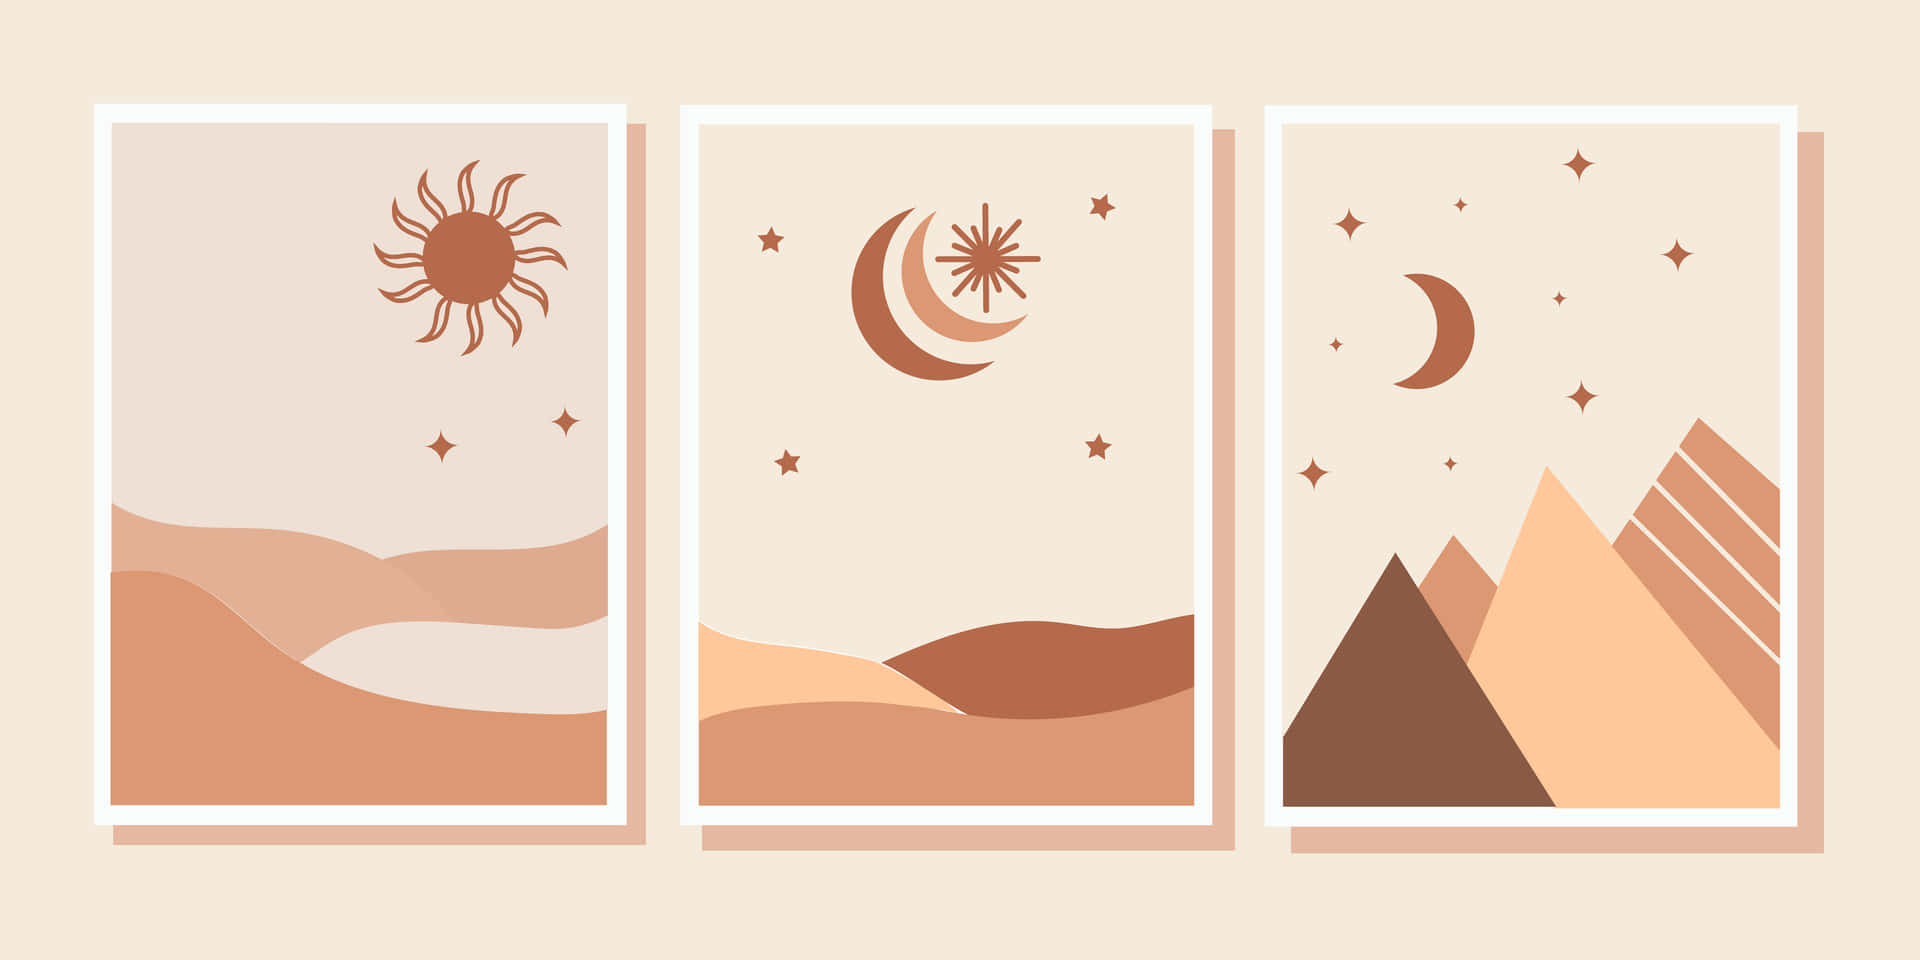 Three Banners With Mountains, Sun And Moon